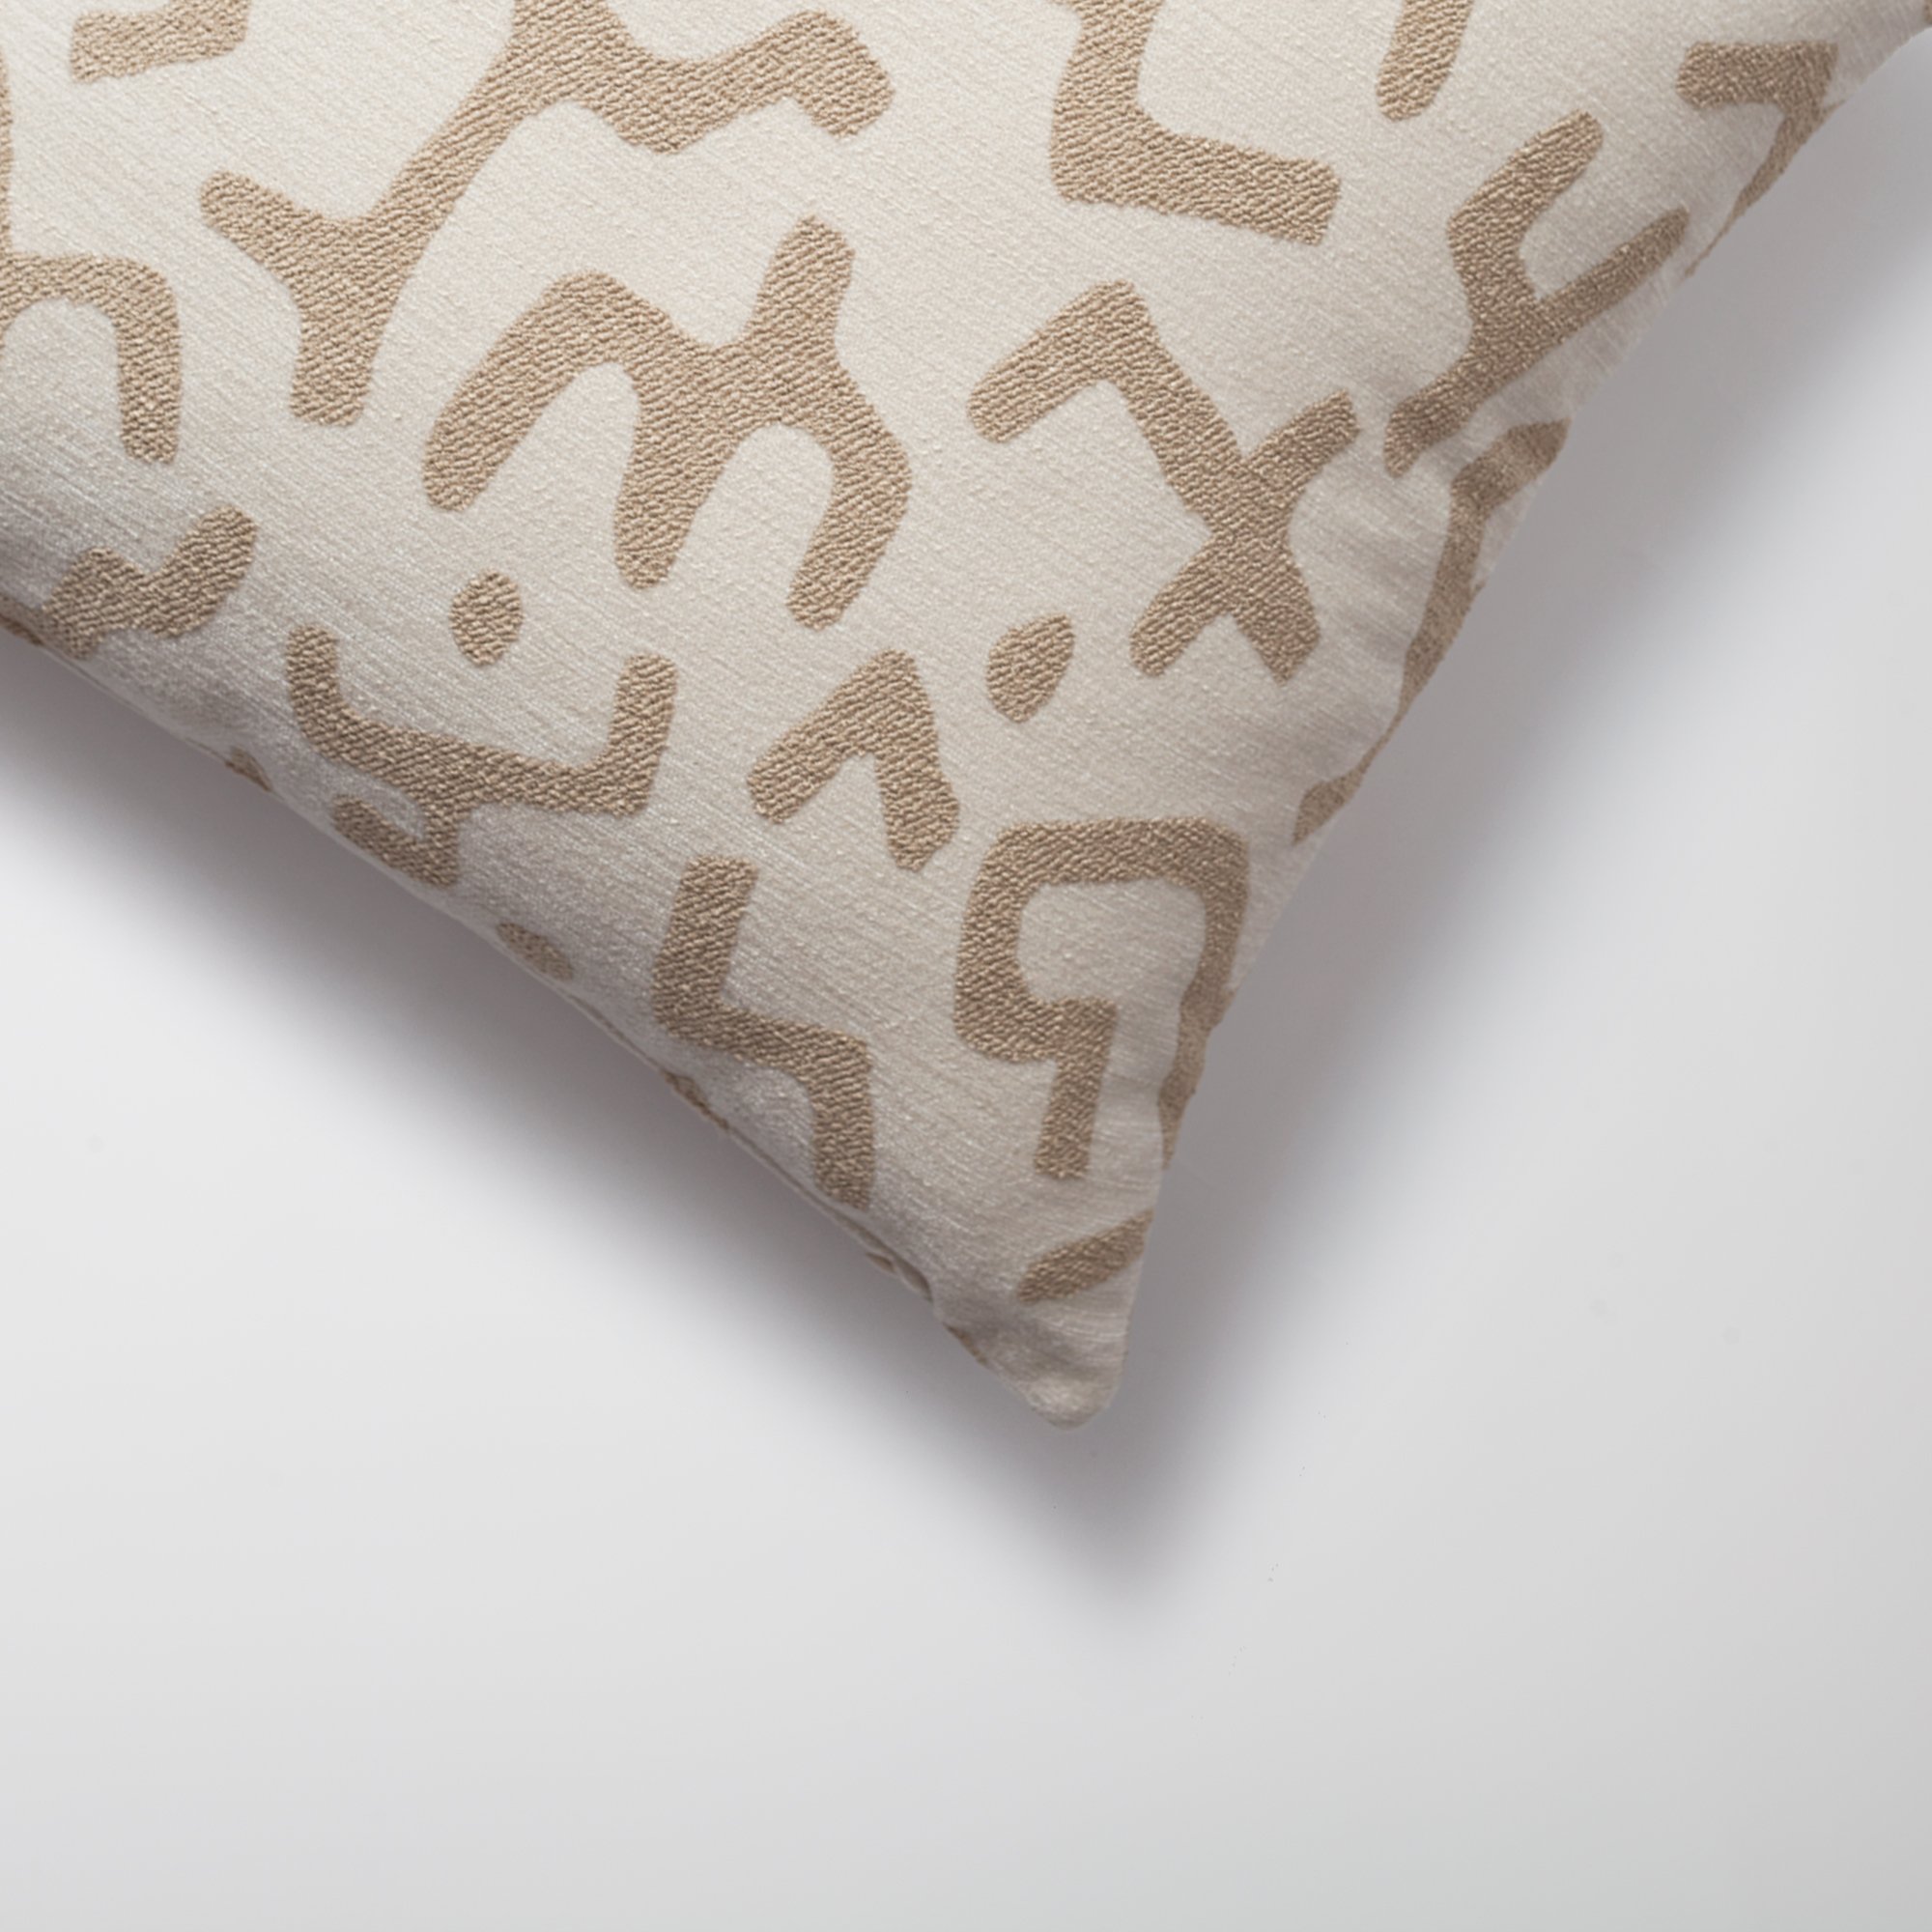 "Nandos" - Maze Patterned 20x20 Inch Pillow - Cream (Cover Only)